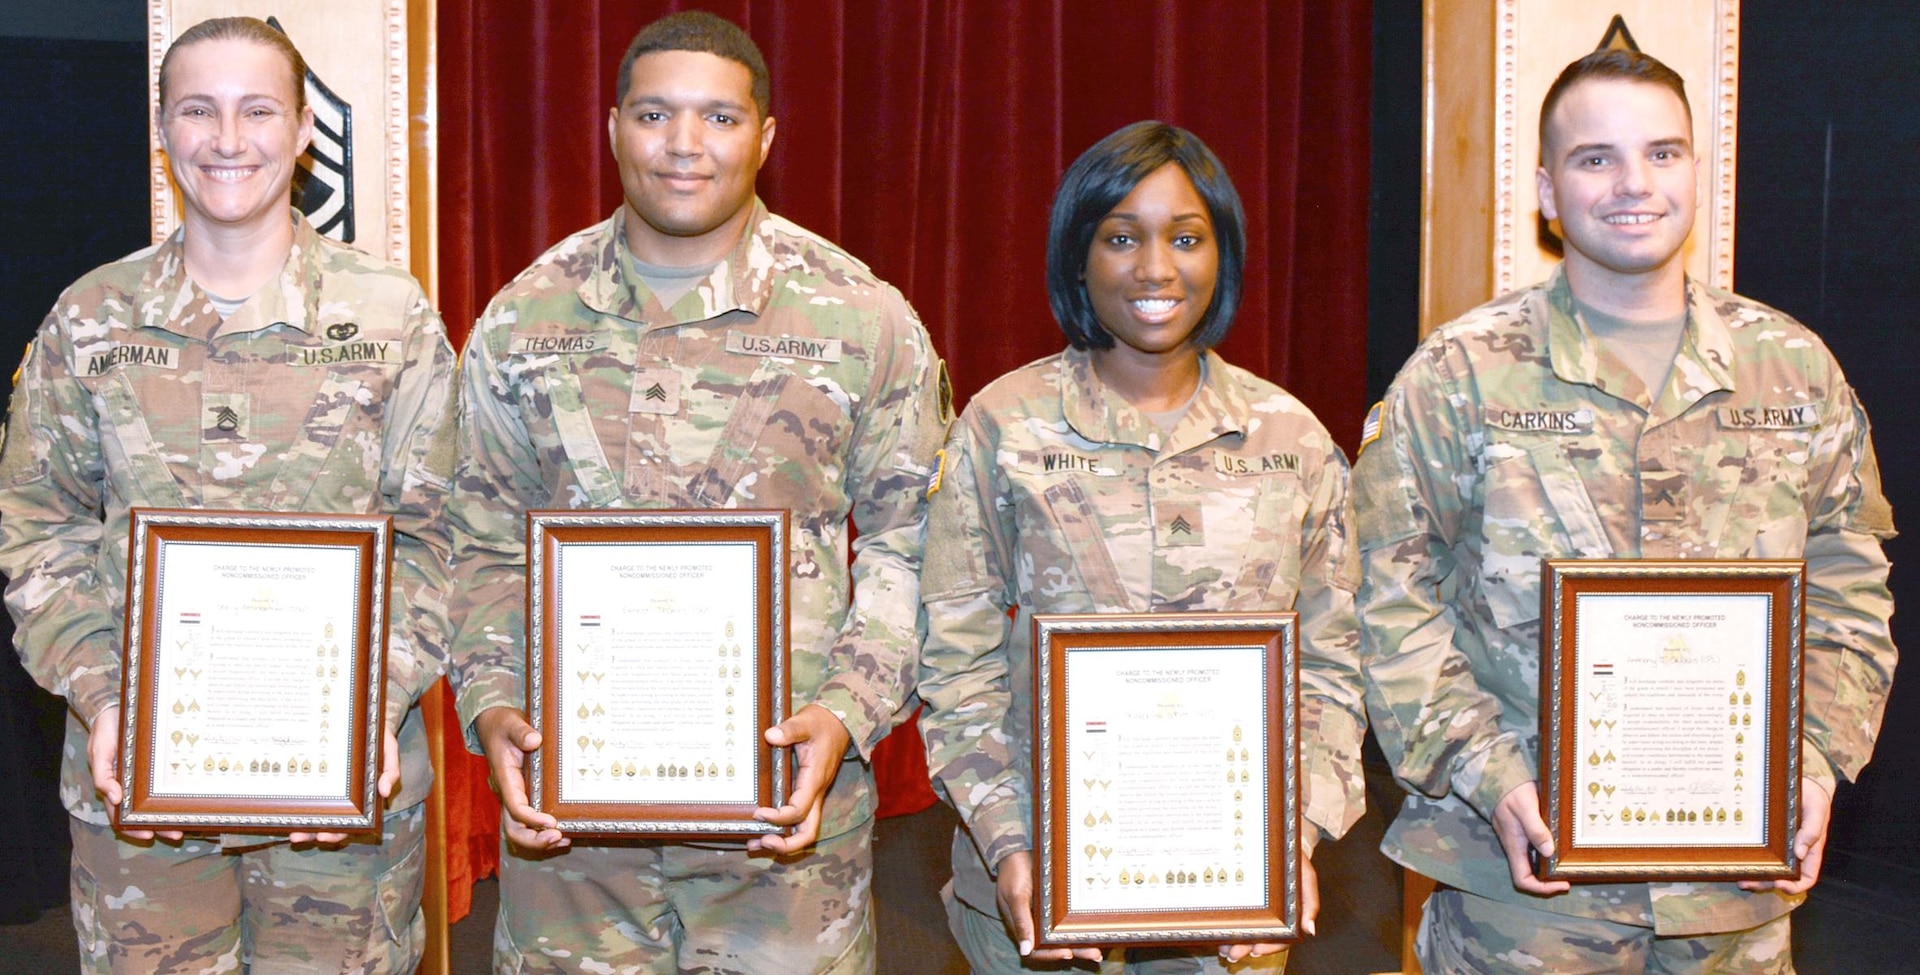 (From left) Staff Sgt. Shelly Ammerman, Sgt. Ernest Thomas, Sgt. Sharonica White and Cpl. Anthony Carkins from the 187th Medical Battalion pose after their induction as noncommissioned officers during a ceremony at the Fort Sam Houston Theater Sept. 1.
